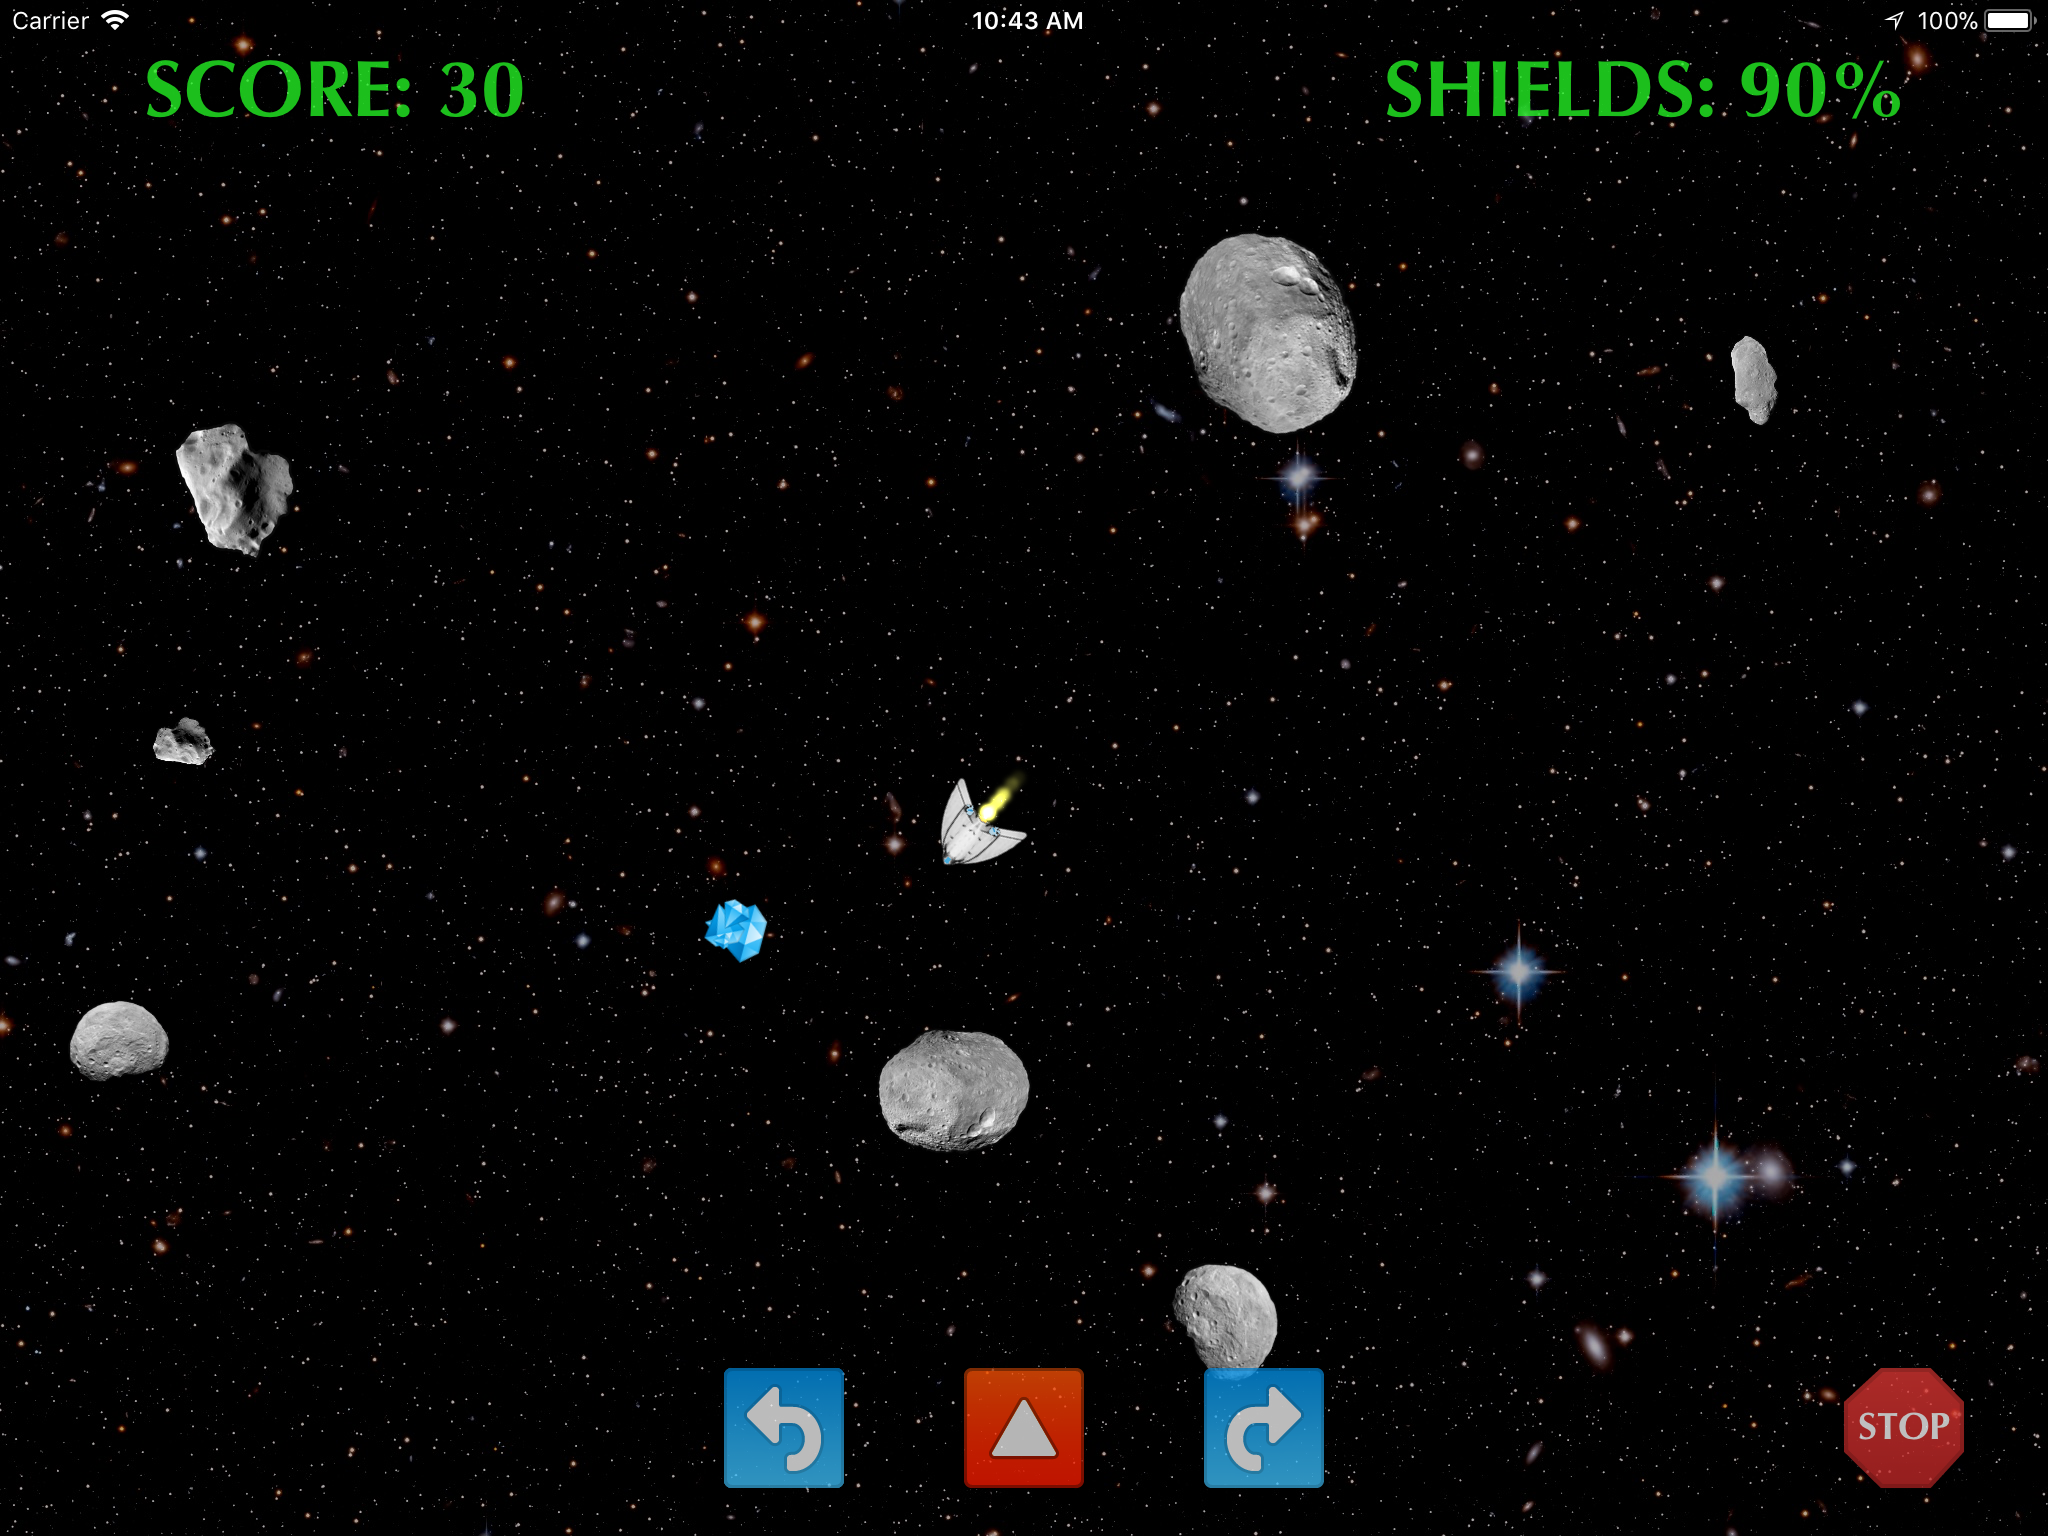 Keithsteroids in play screenshot